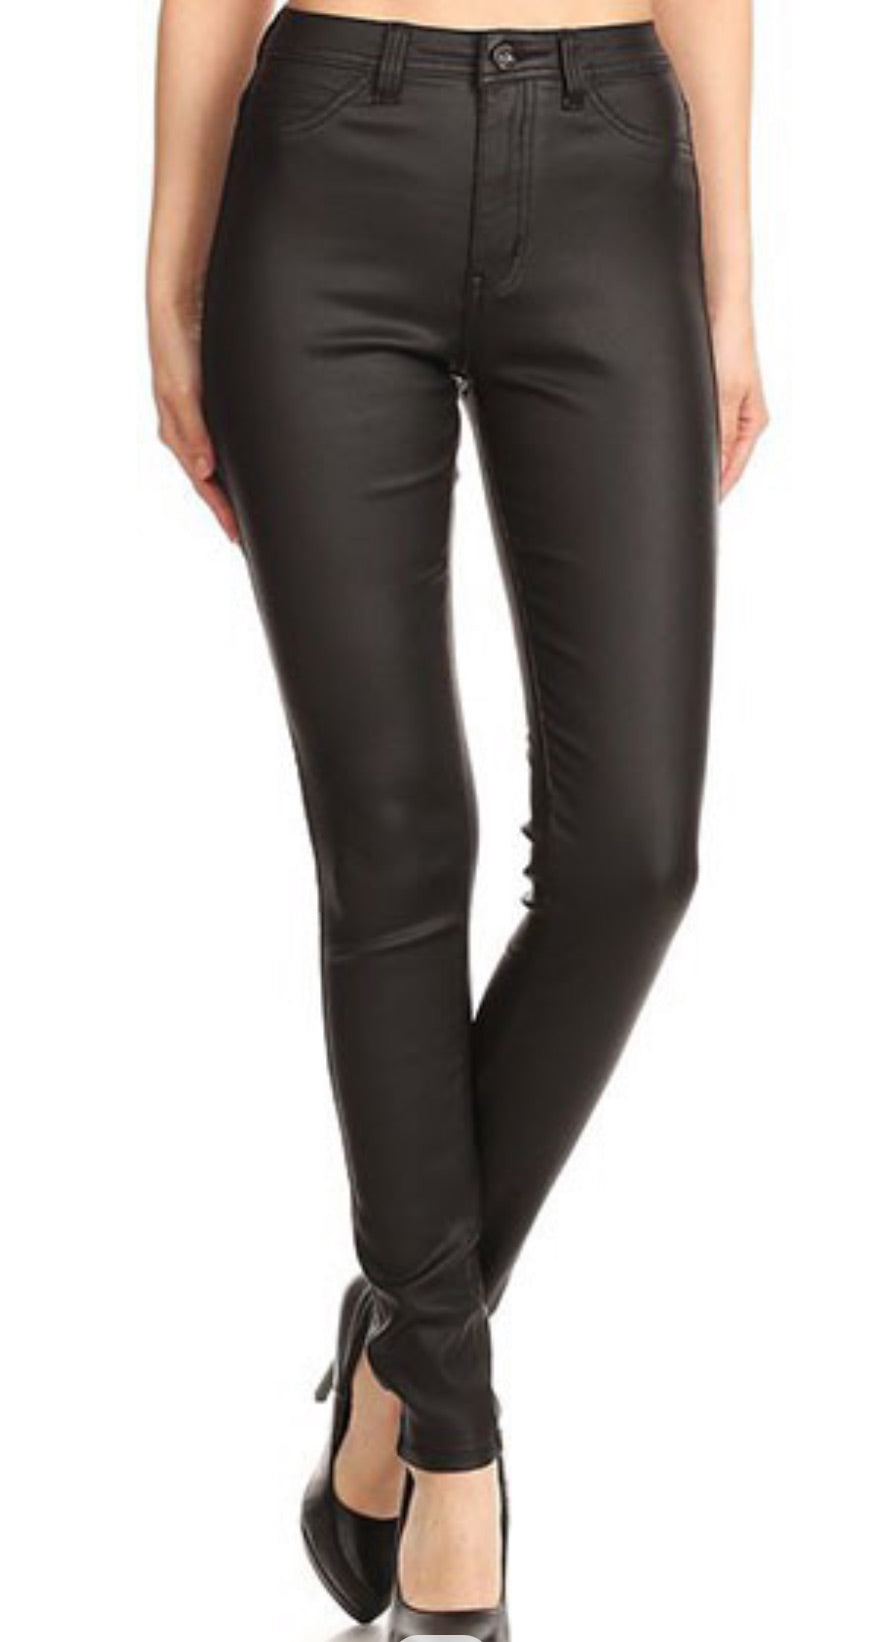 Luxe leatherette jeggings